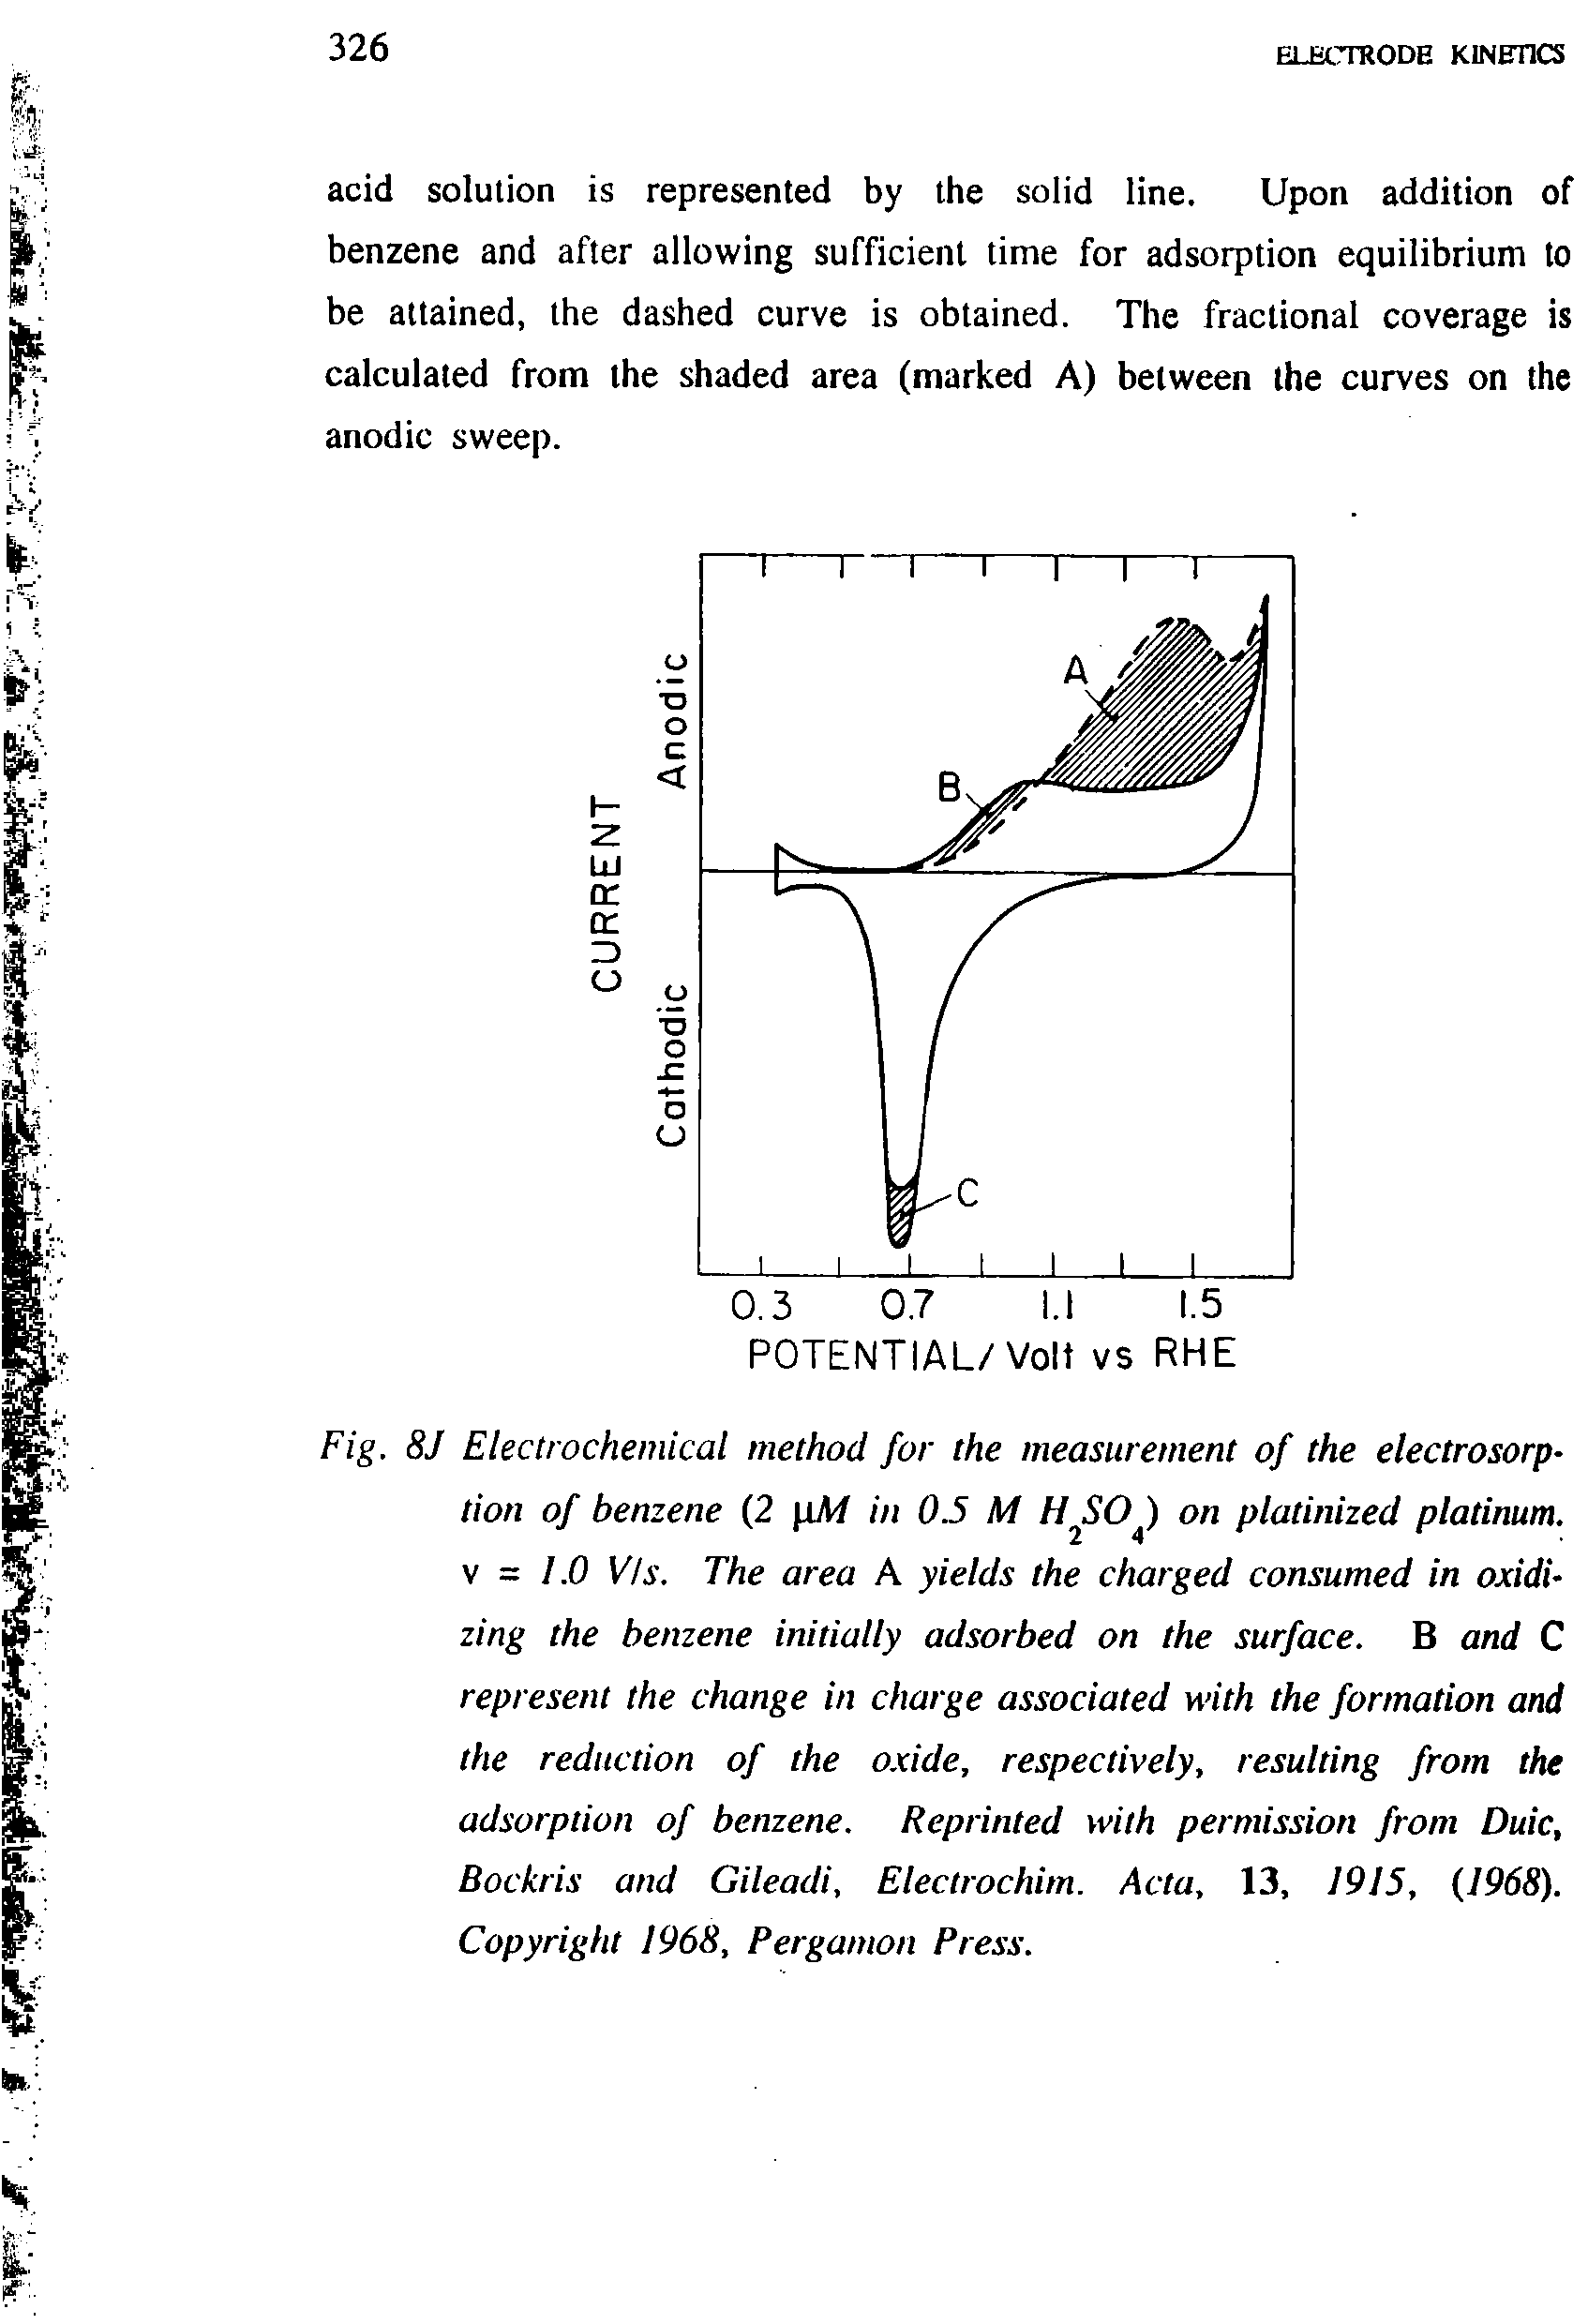 Fig. 8J Electrochemical method for the measurement of the electrosorption of benzene (2 ixM in 0.5 M H SO ) on platinized platinum. = 1.0 Vis. The area A yields the charged consumed in oxidizing the benzene initially adsorbed on the surface. B and C represent the change in charge associated with the formation and the reduction of the oxide, respectively, resulting from the adsorption of benzene. Reprinted with permission from Duic, Bockris and Gileadi, Electrochim. Acta, 13, 1915, (1968). Copyright 1968, Pergamon Press.